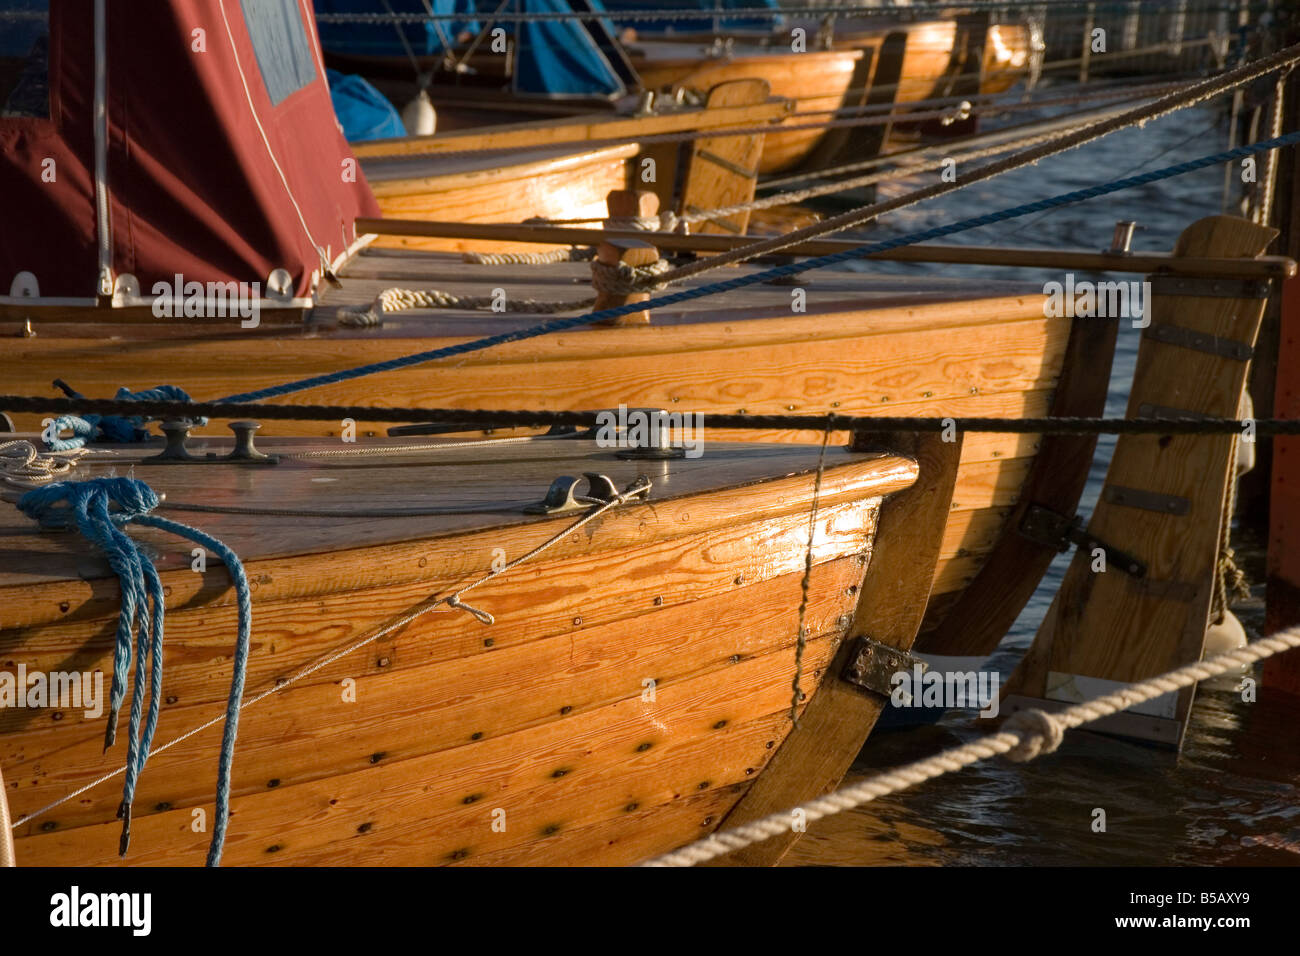 Wooden boats lined up in the summer sun on the river Glomma near the old town of Gamlebyen in Fredrikstad Norway, south of Oslo Stock Photo